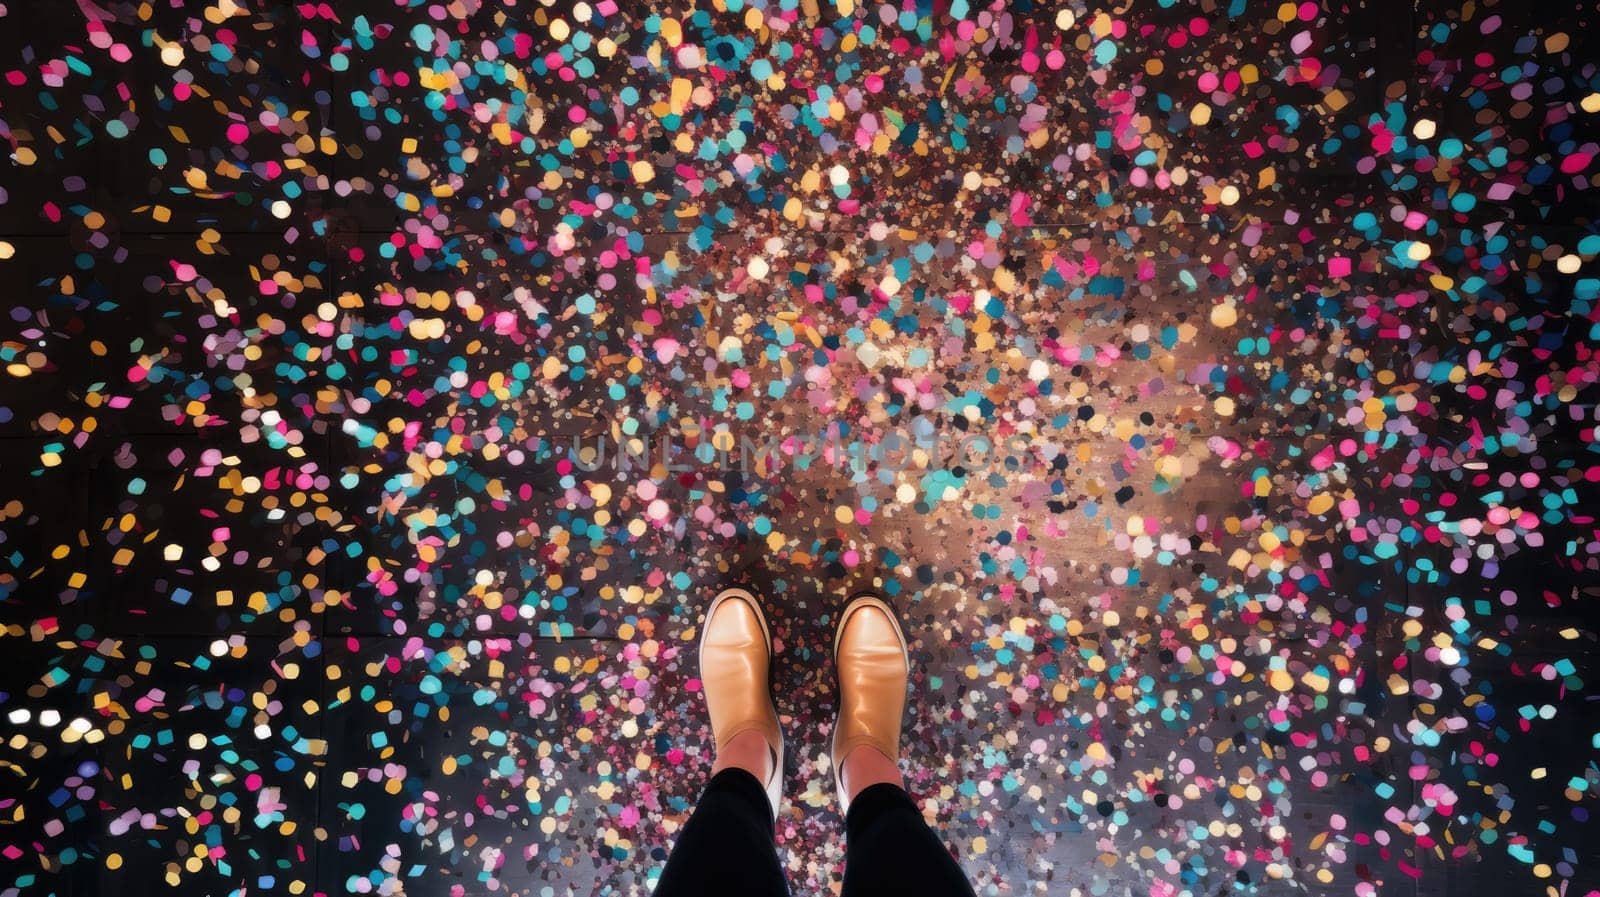 Background floor with shining confetti and legs. Cleaning up after the party by natali_brill